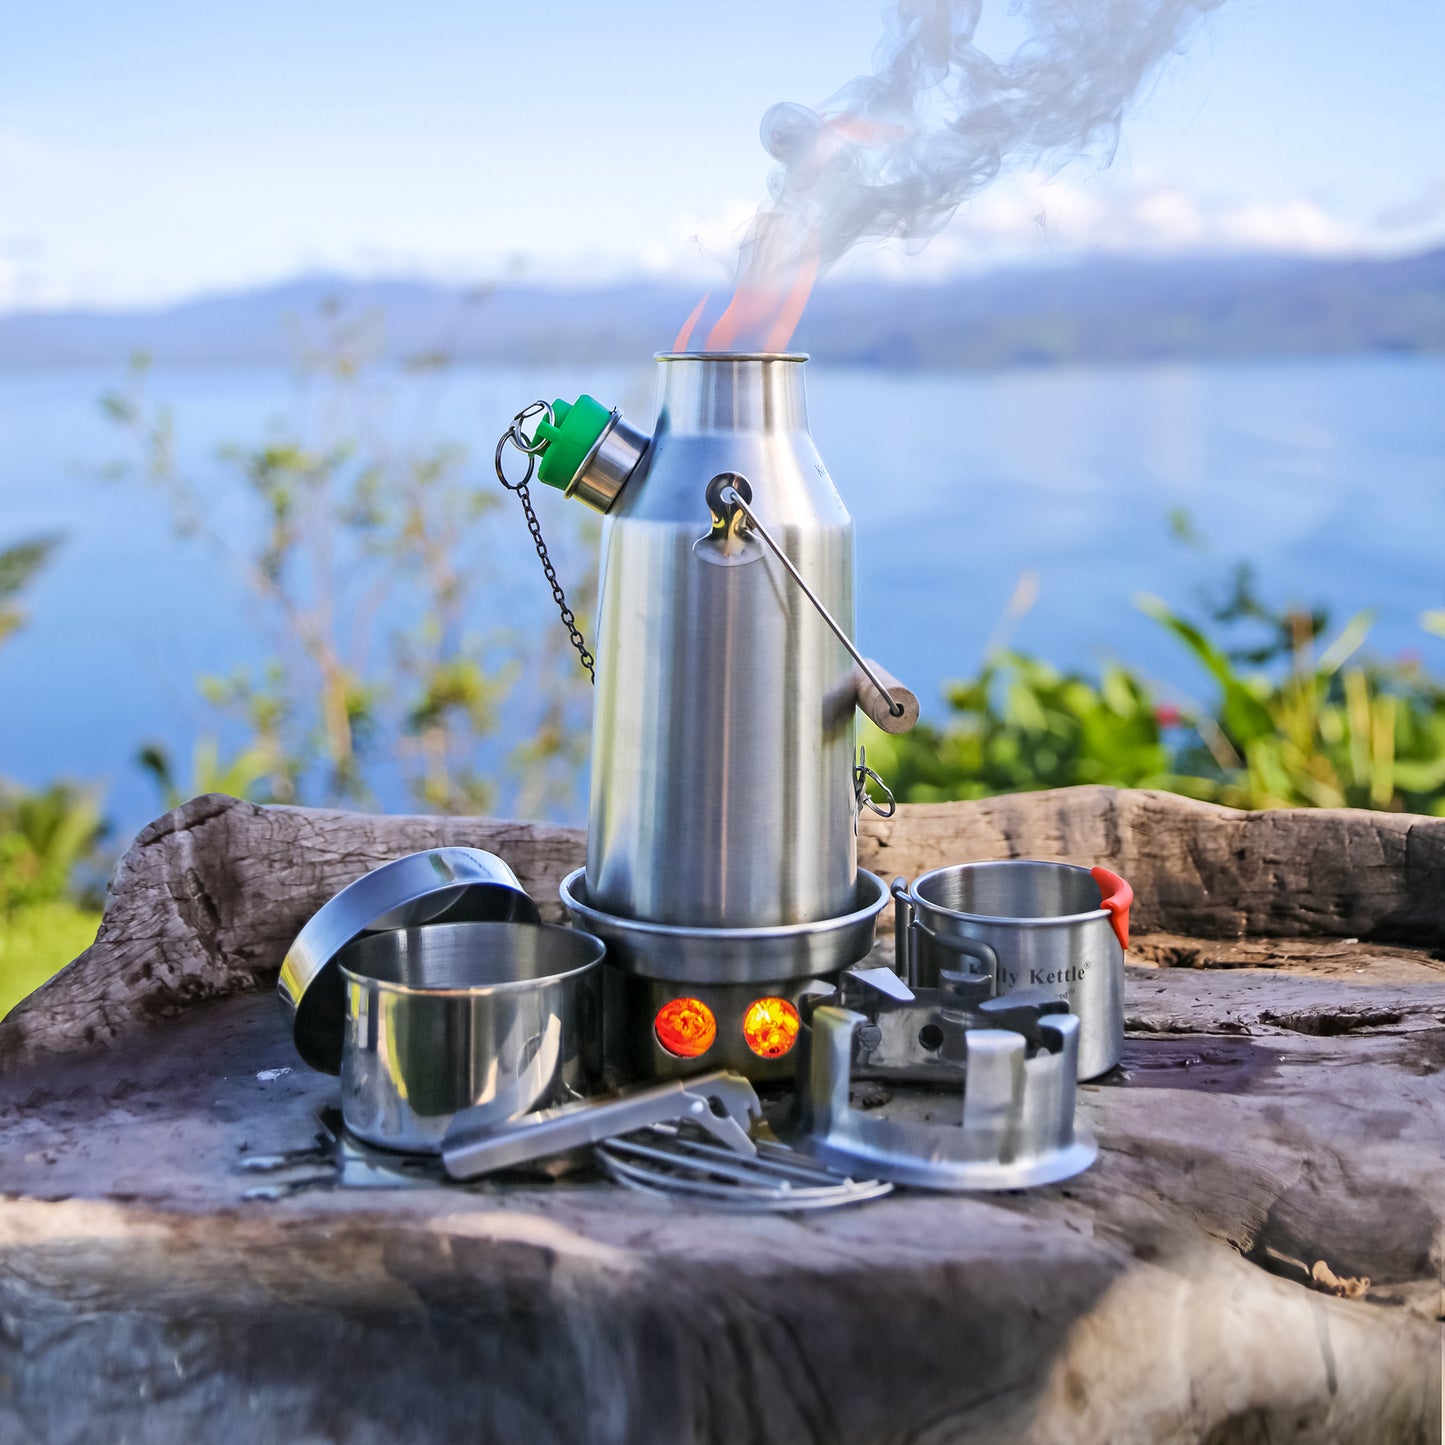 Kelly Kettle® Scout – Basic Kit – Stainless Steel Camping Kettle